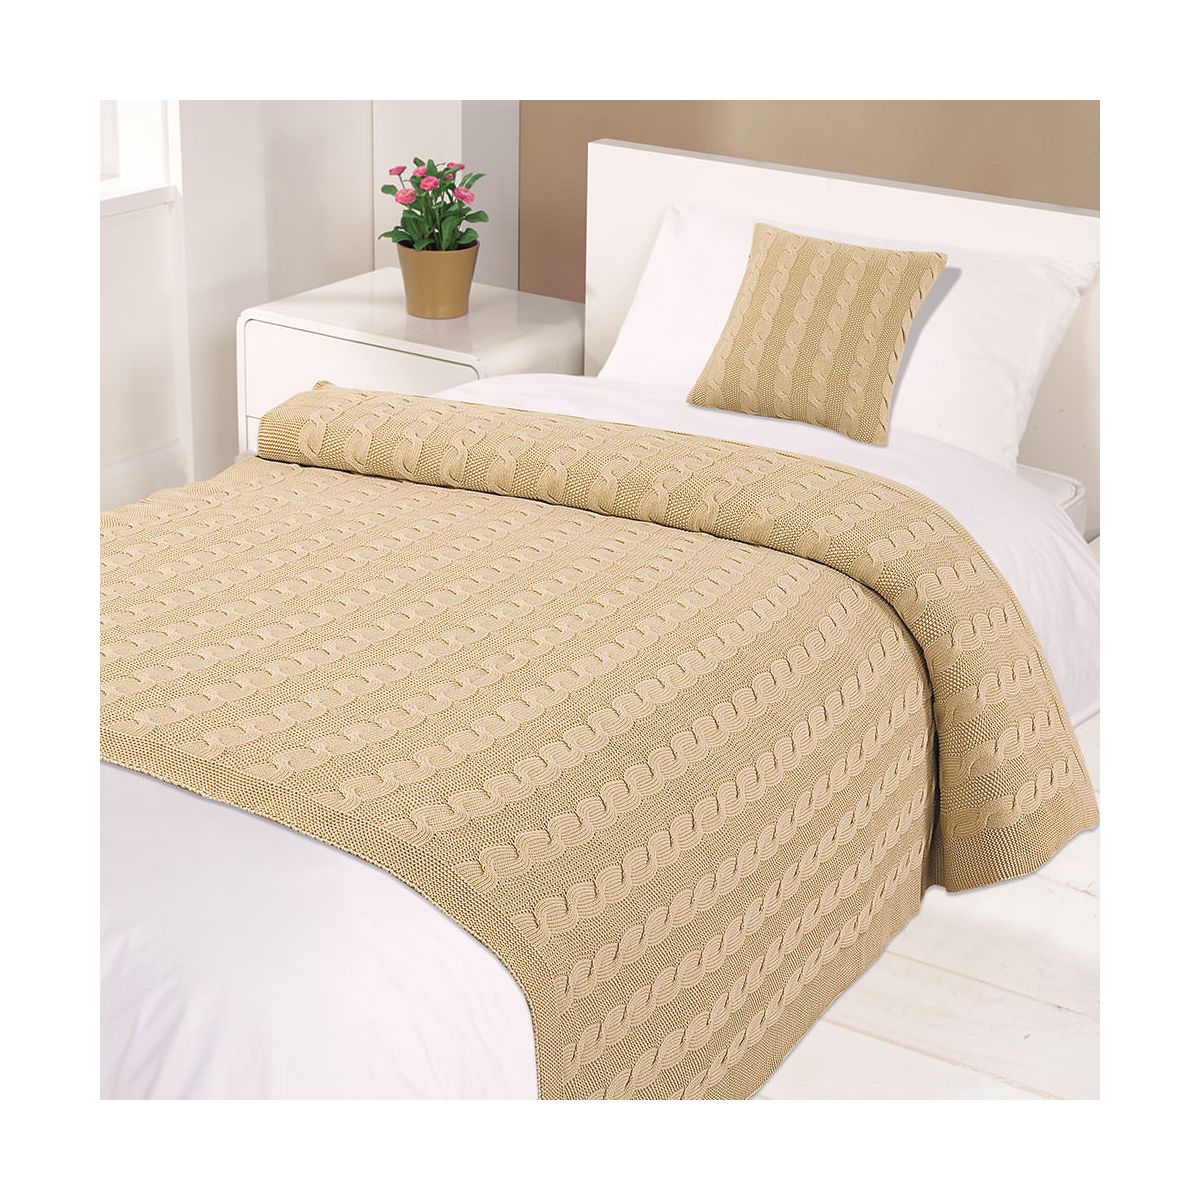 Highams Cable Knit 100% Cotton Throw - Natural Beige 